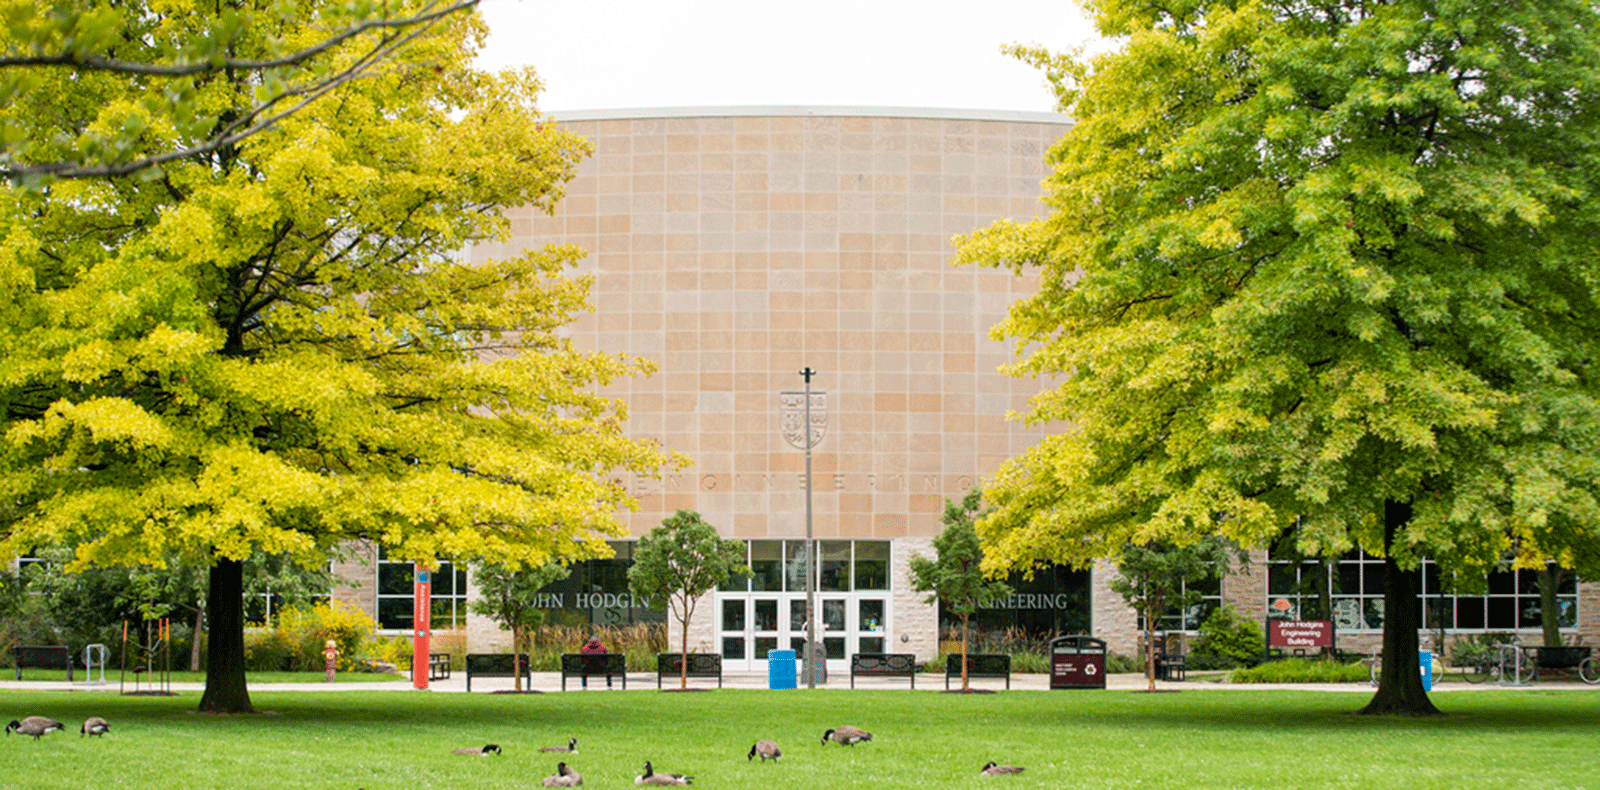 Green trees on campus with geese on the grass